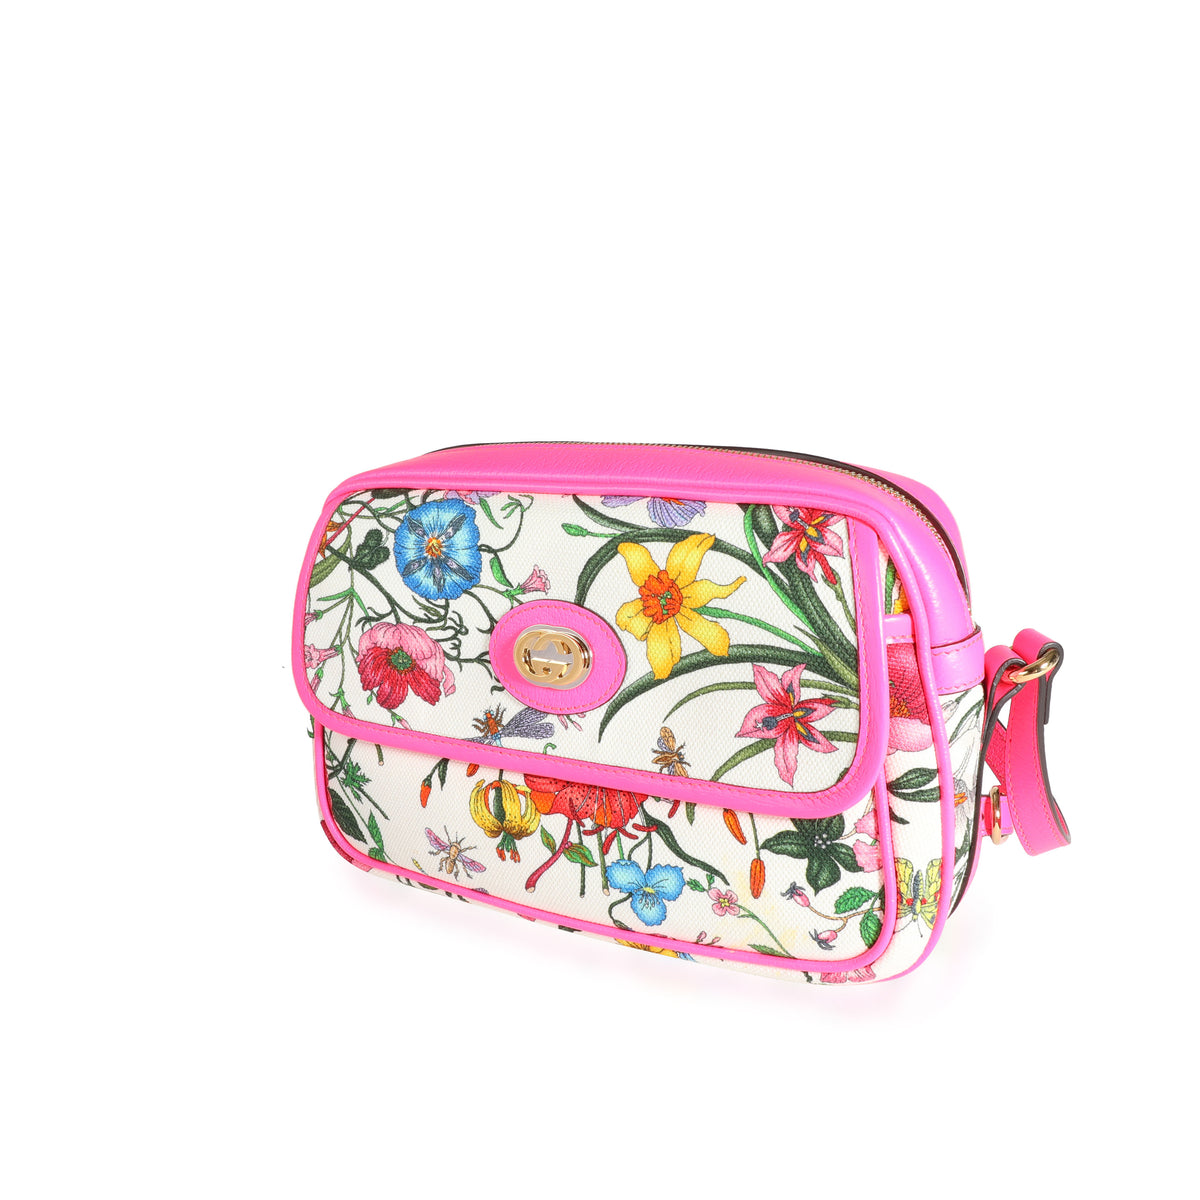 Gucci Flora Canvas & Neon Pink Leather Small Shoulder Bag